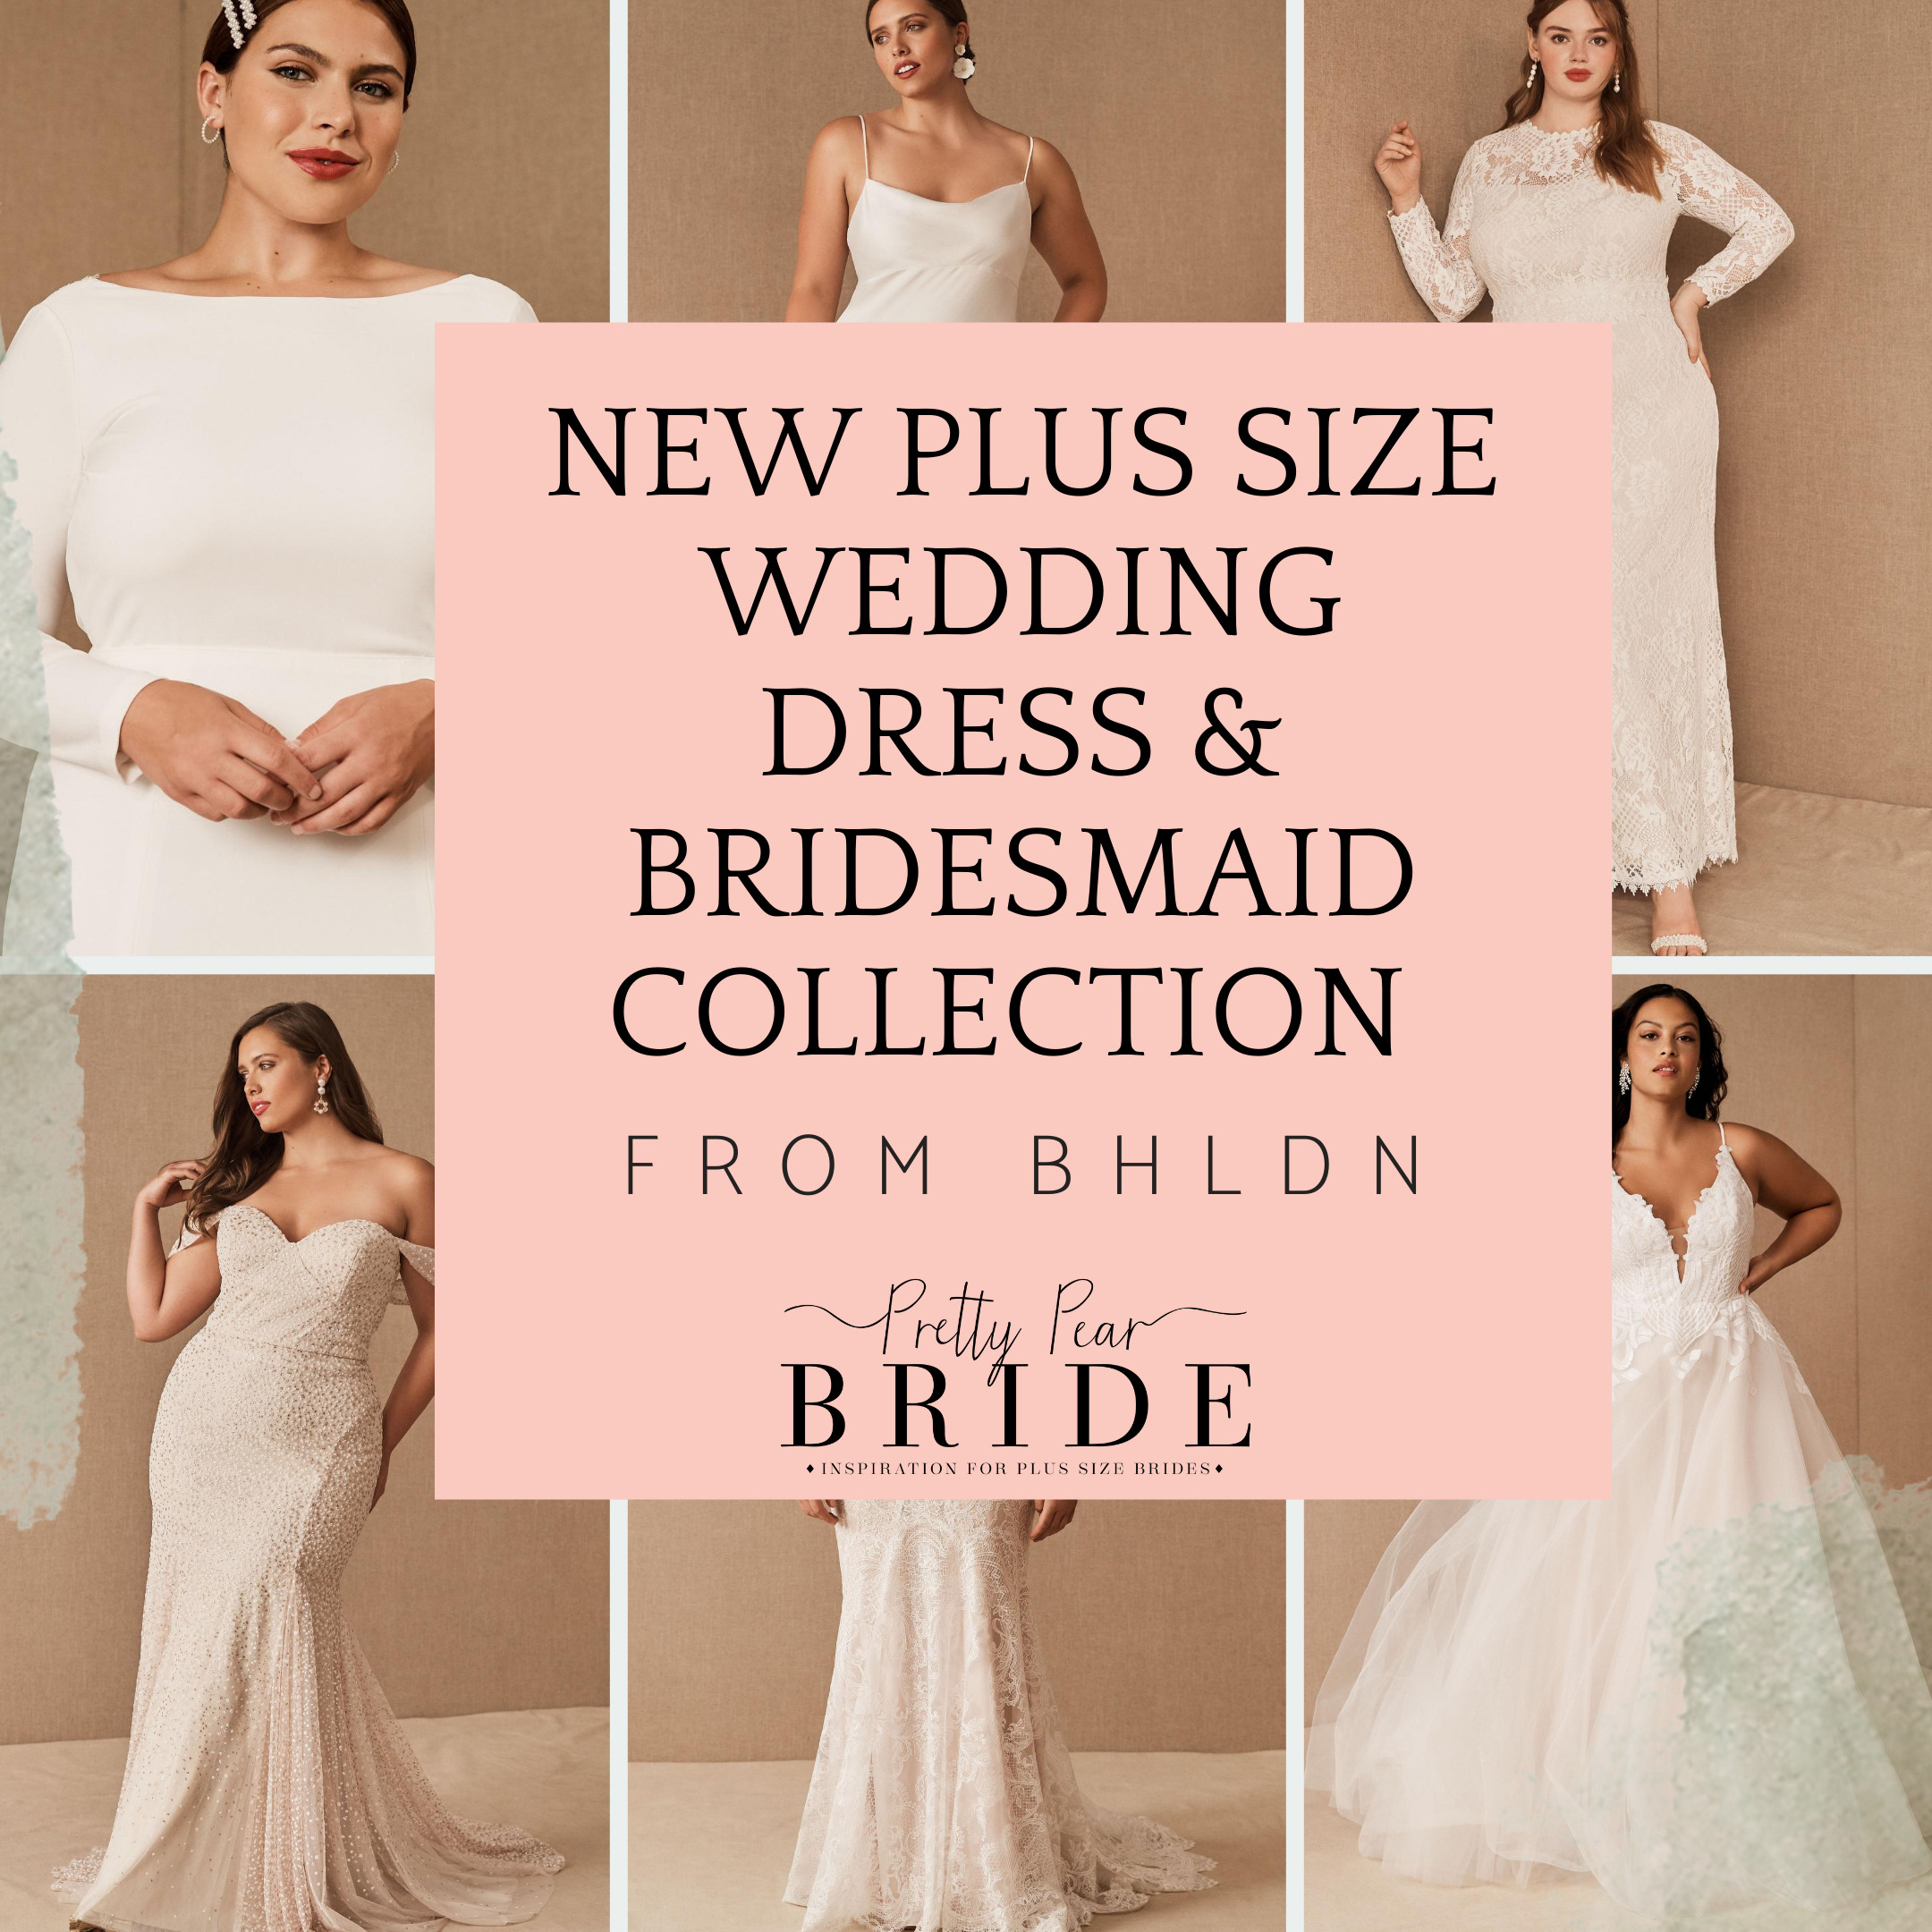 BHLDN’s New Plus Size Wedding Dress and Bridesmaid Collection